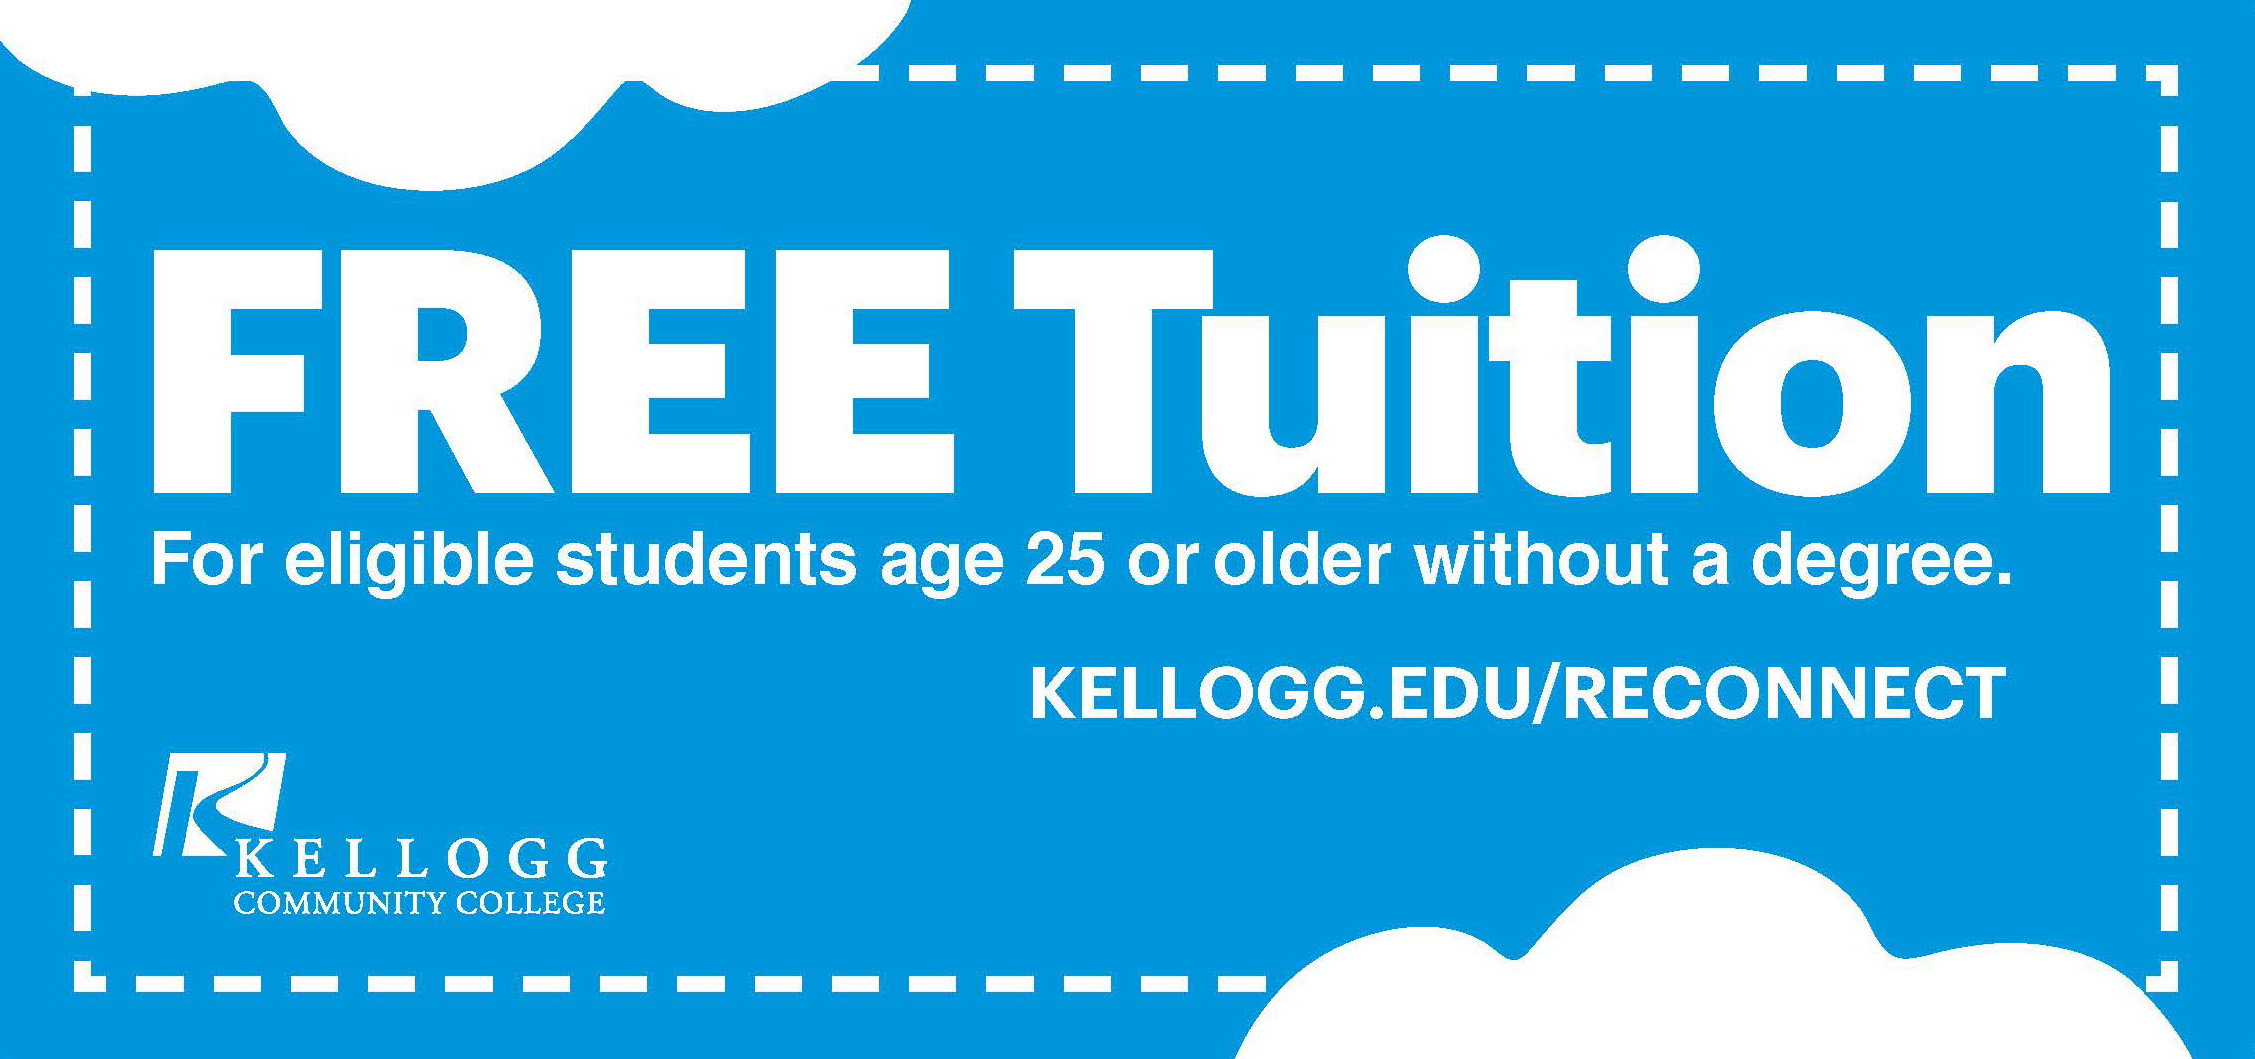 White text on a light blue background that reads, "FREE TUITION for students age 25 or older without a degree."